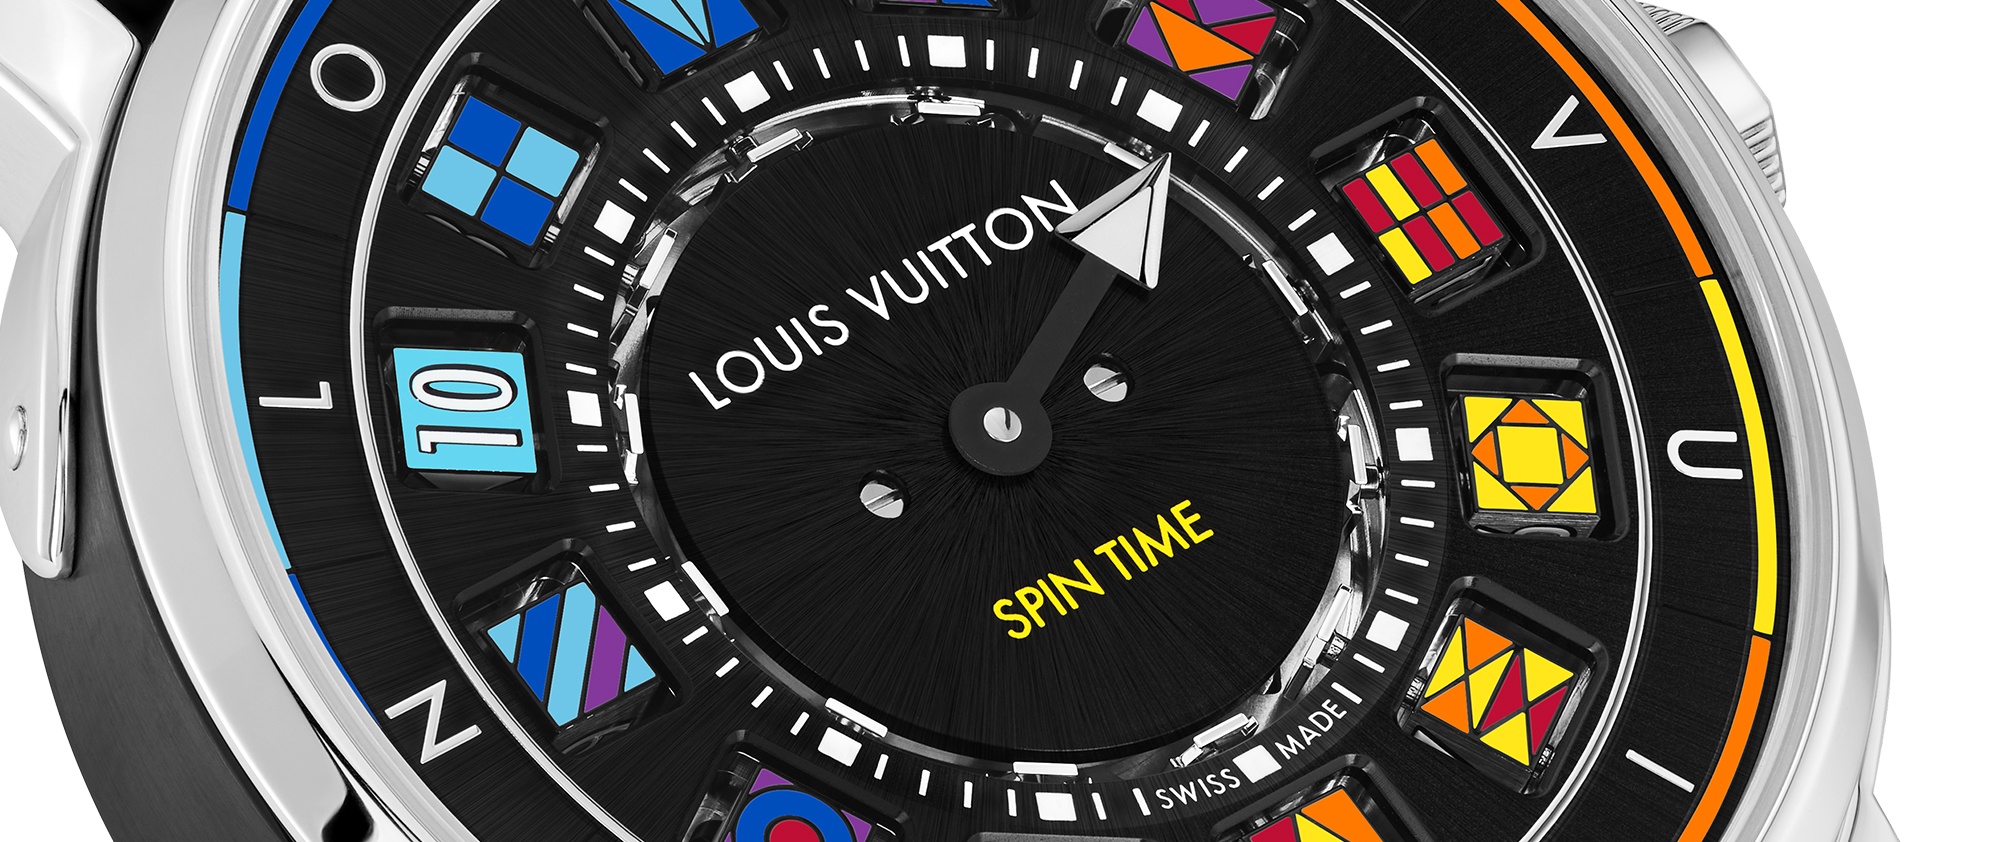 Louis Vuitton Presents New Escale Spin Time Watch